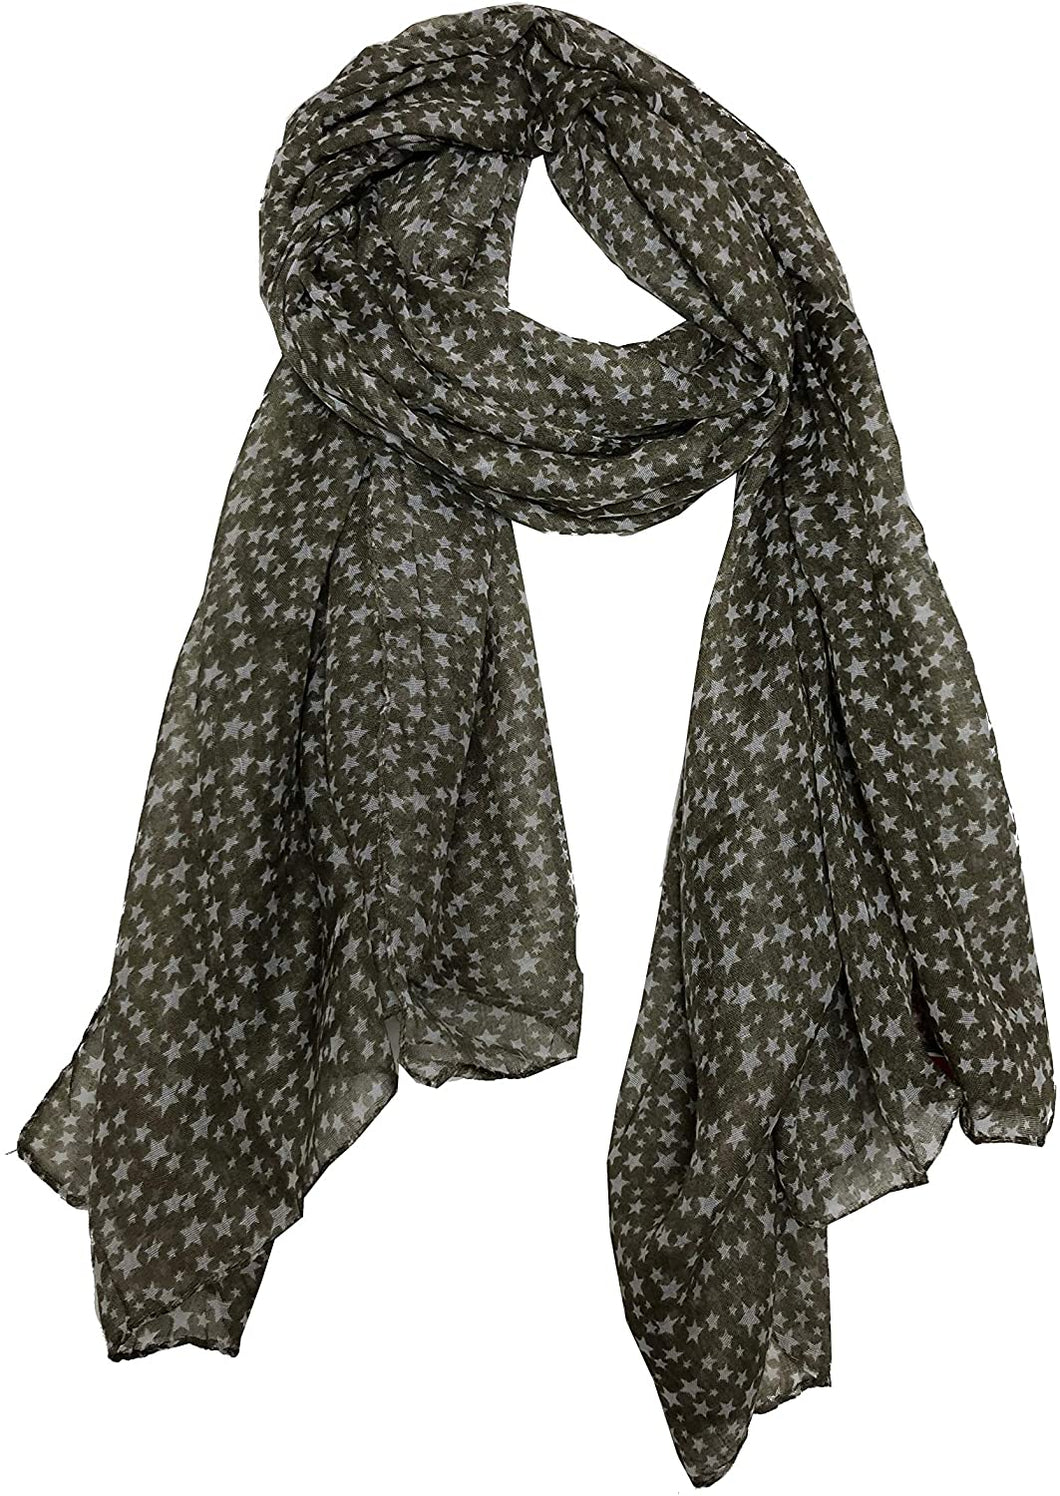 Dark brown with white small star design long scarf